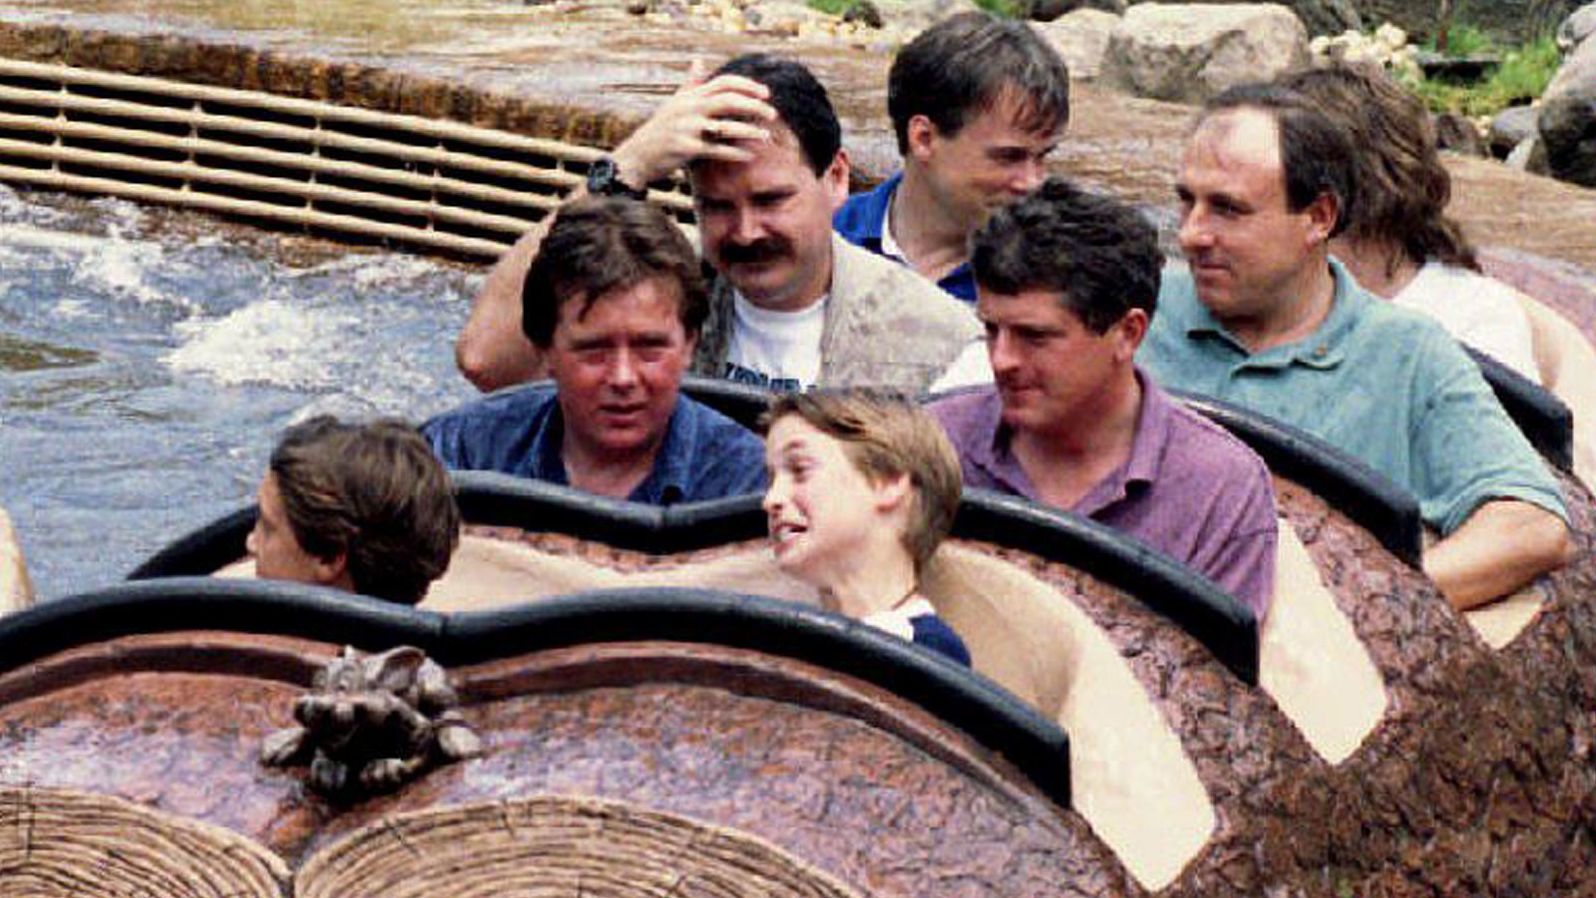 Prince William grimaces after riding Splash Mountain at Walt Disney World in Florida in 1993. He was with friends of the royal family on a three-day vacation.